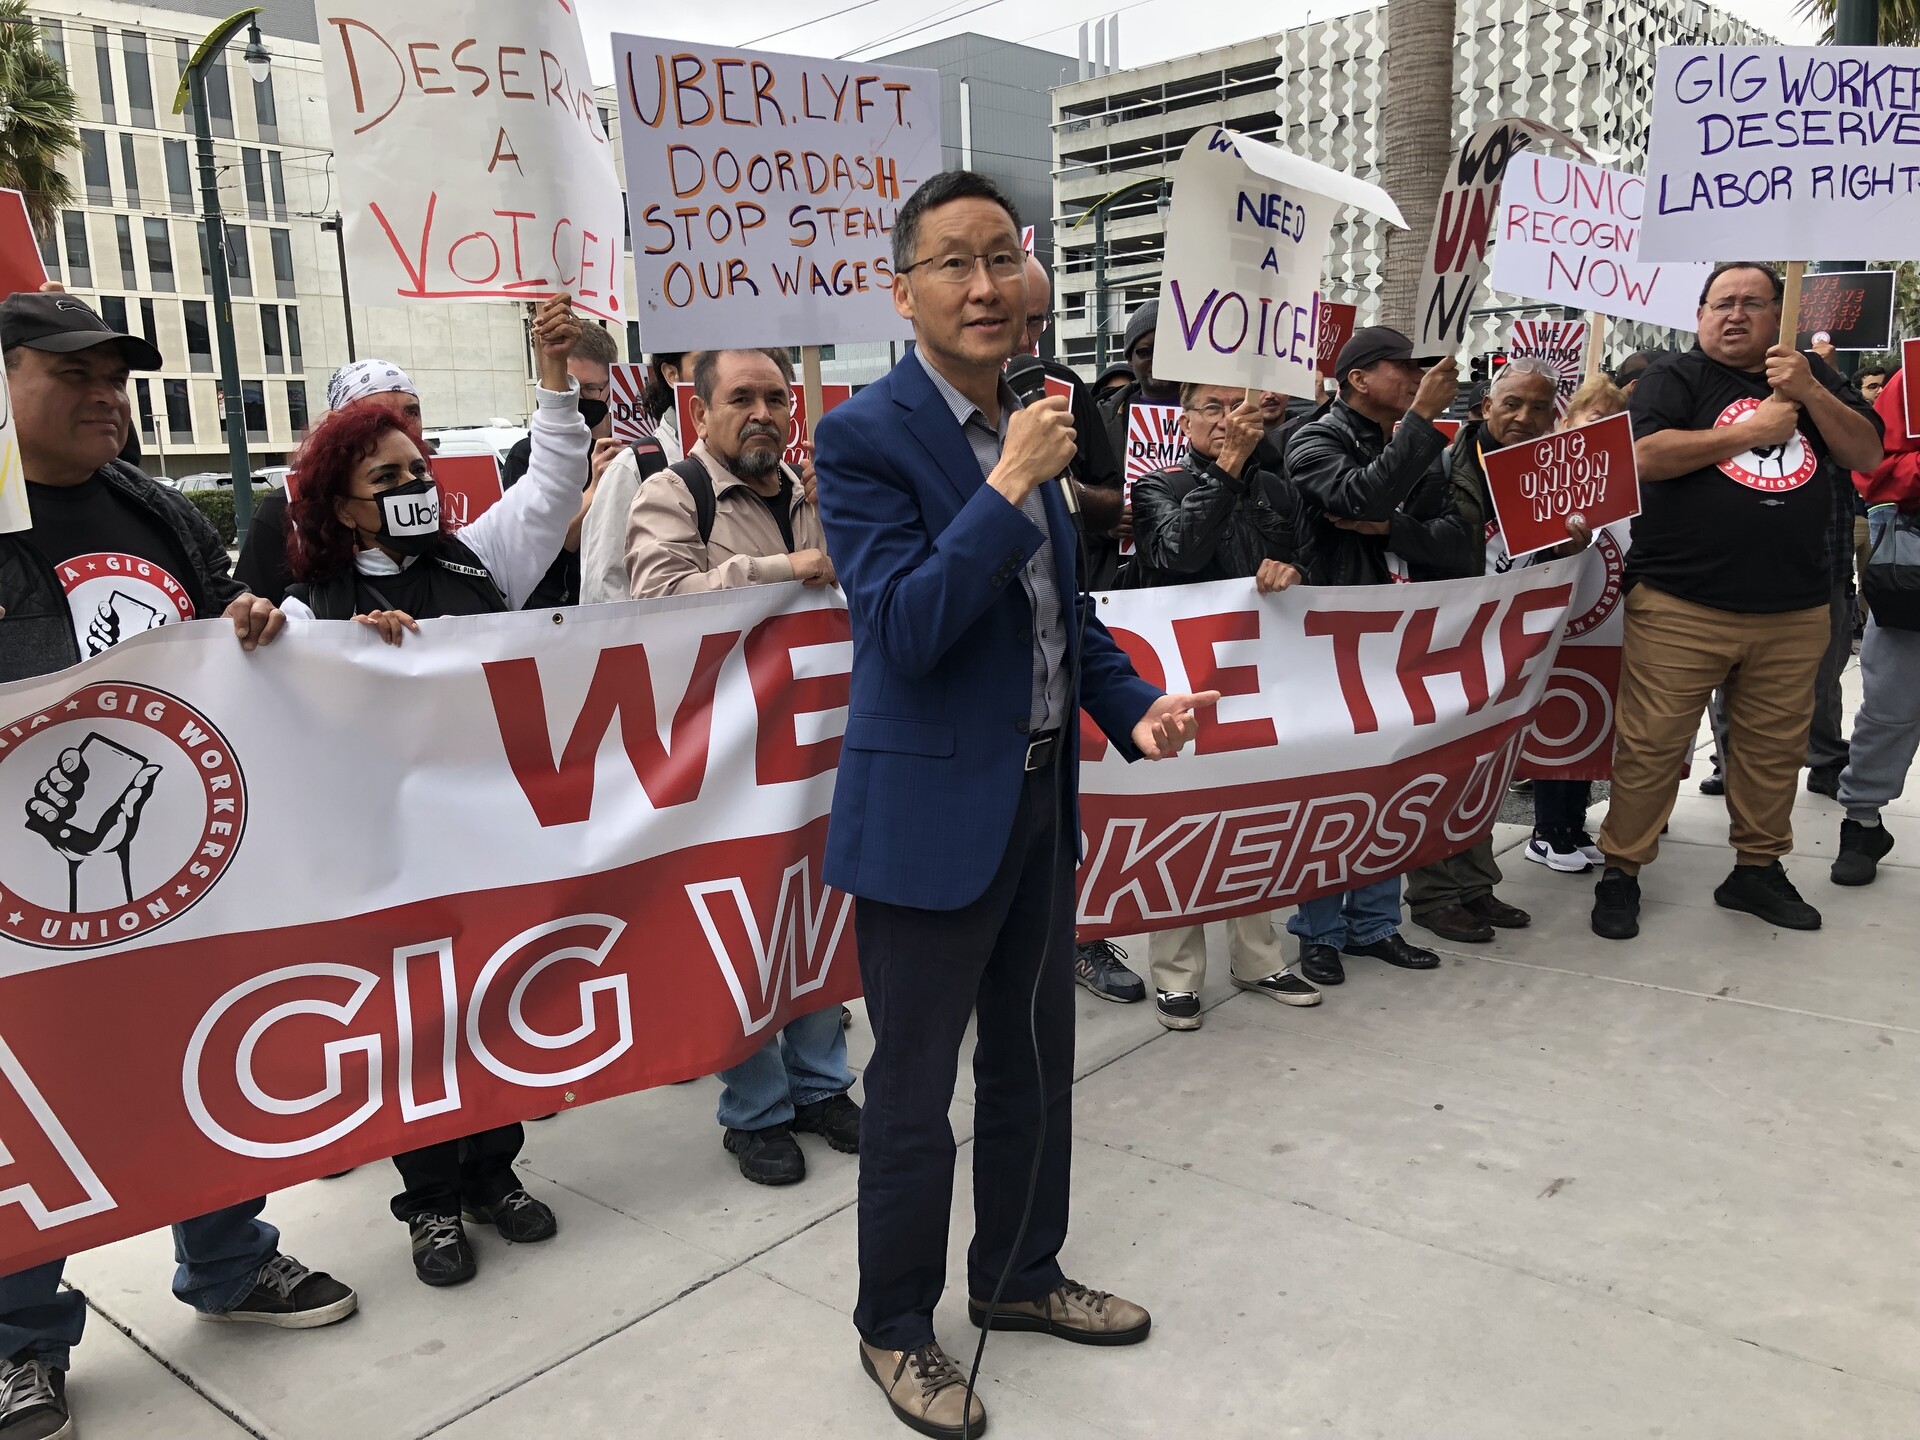 An Asian man in a blue suit holding a microphone and speaking with protesters behind him in support of gig workers.